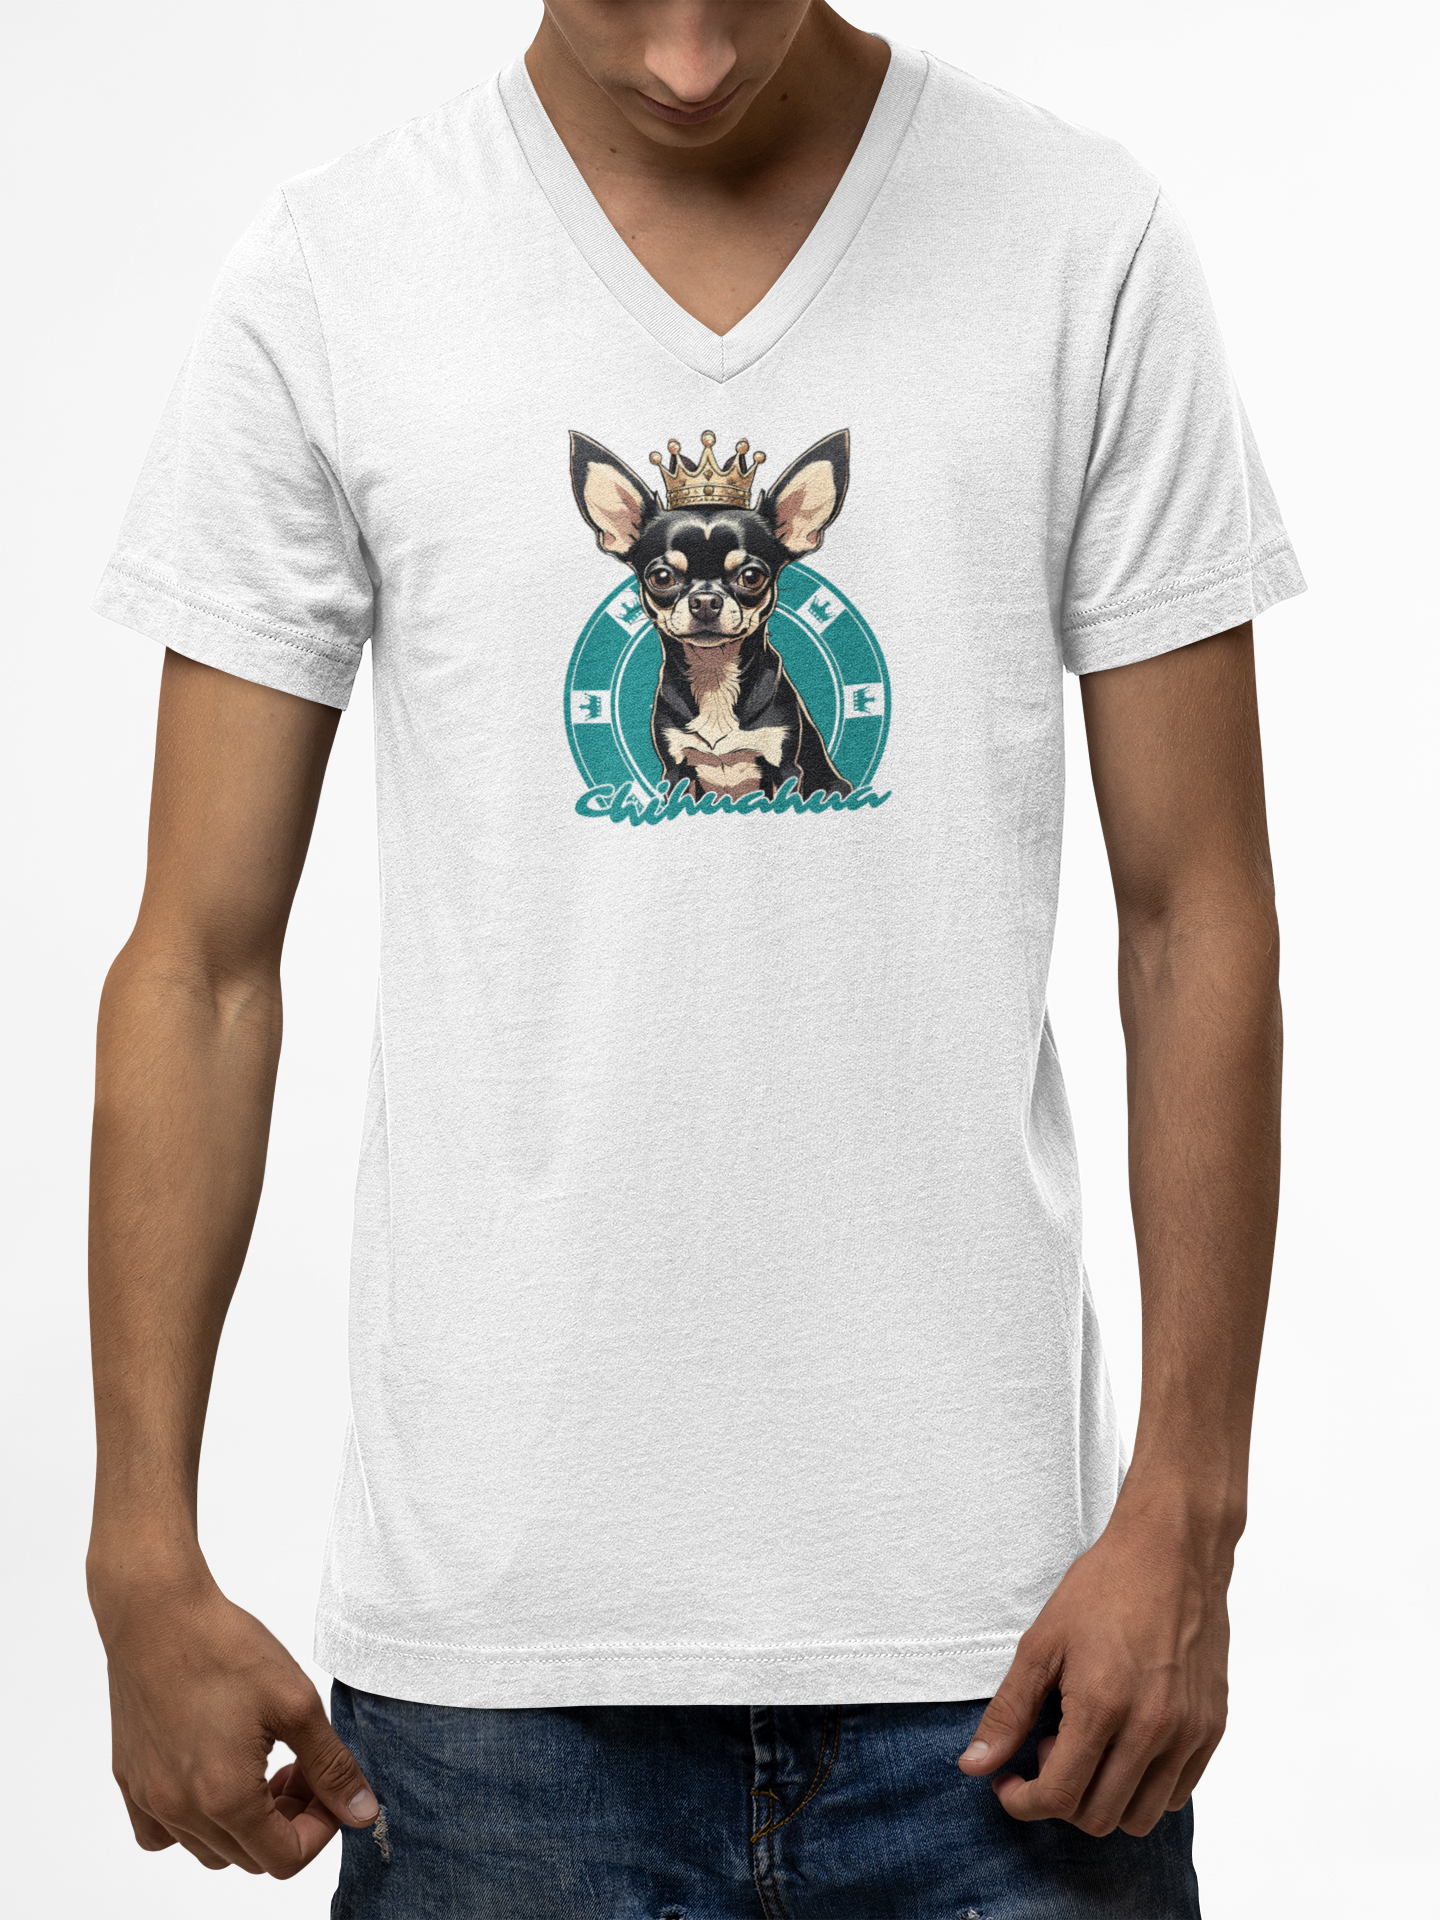 Unisex Jersey Short Sleeve V-Neck Tee with Cute Crowned Chihuahua - Mockup Man